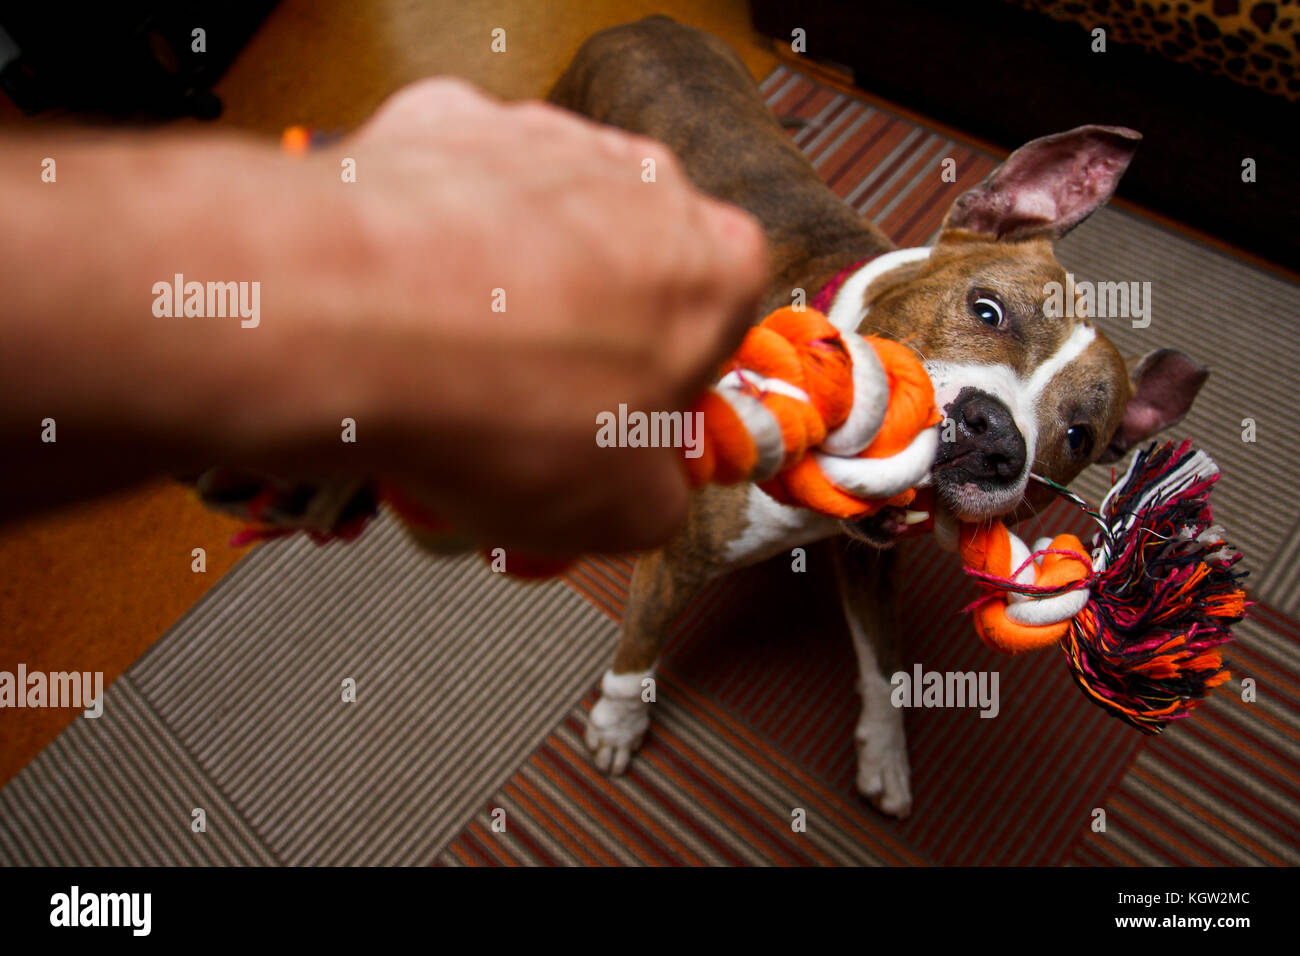 The american staffordshire dog is playing with the owner. He is biting into the rope and fights with the man. Stock Photo